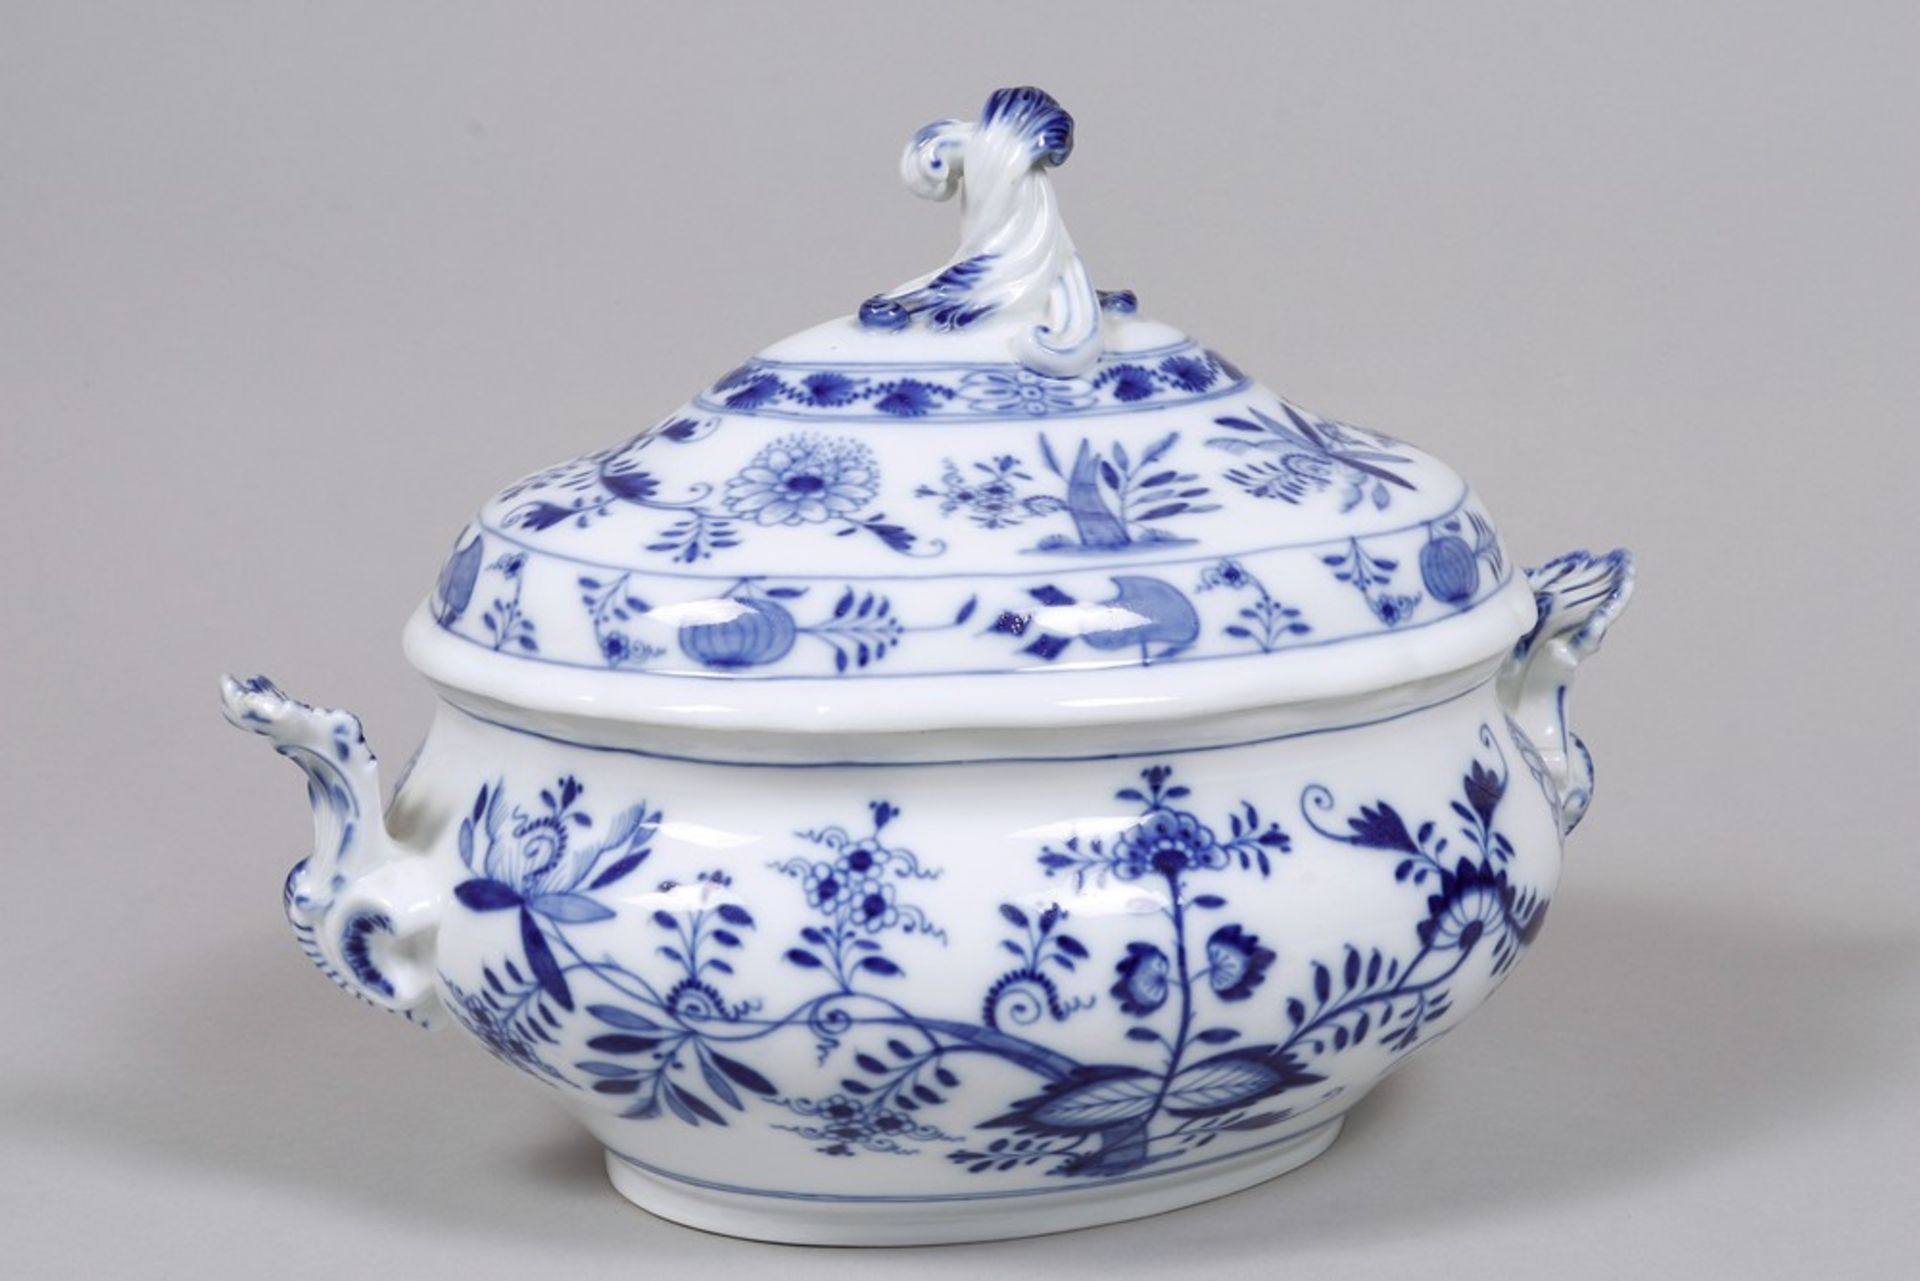 Lidded tureen, Meissen, late 19th C. - Image 2 of 5